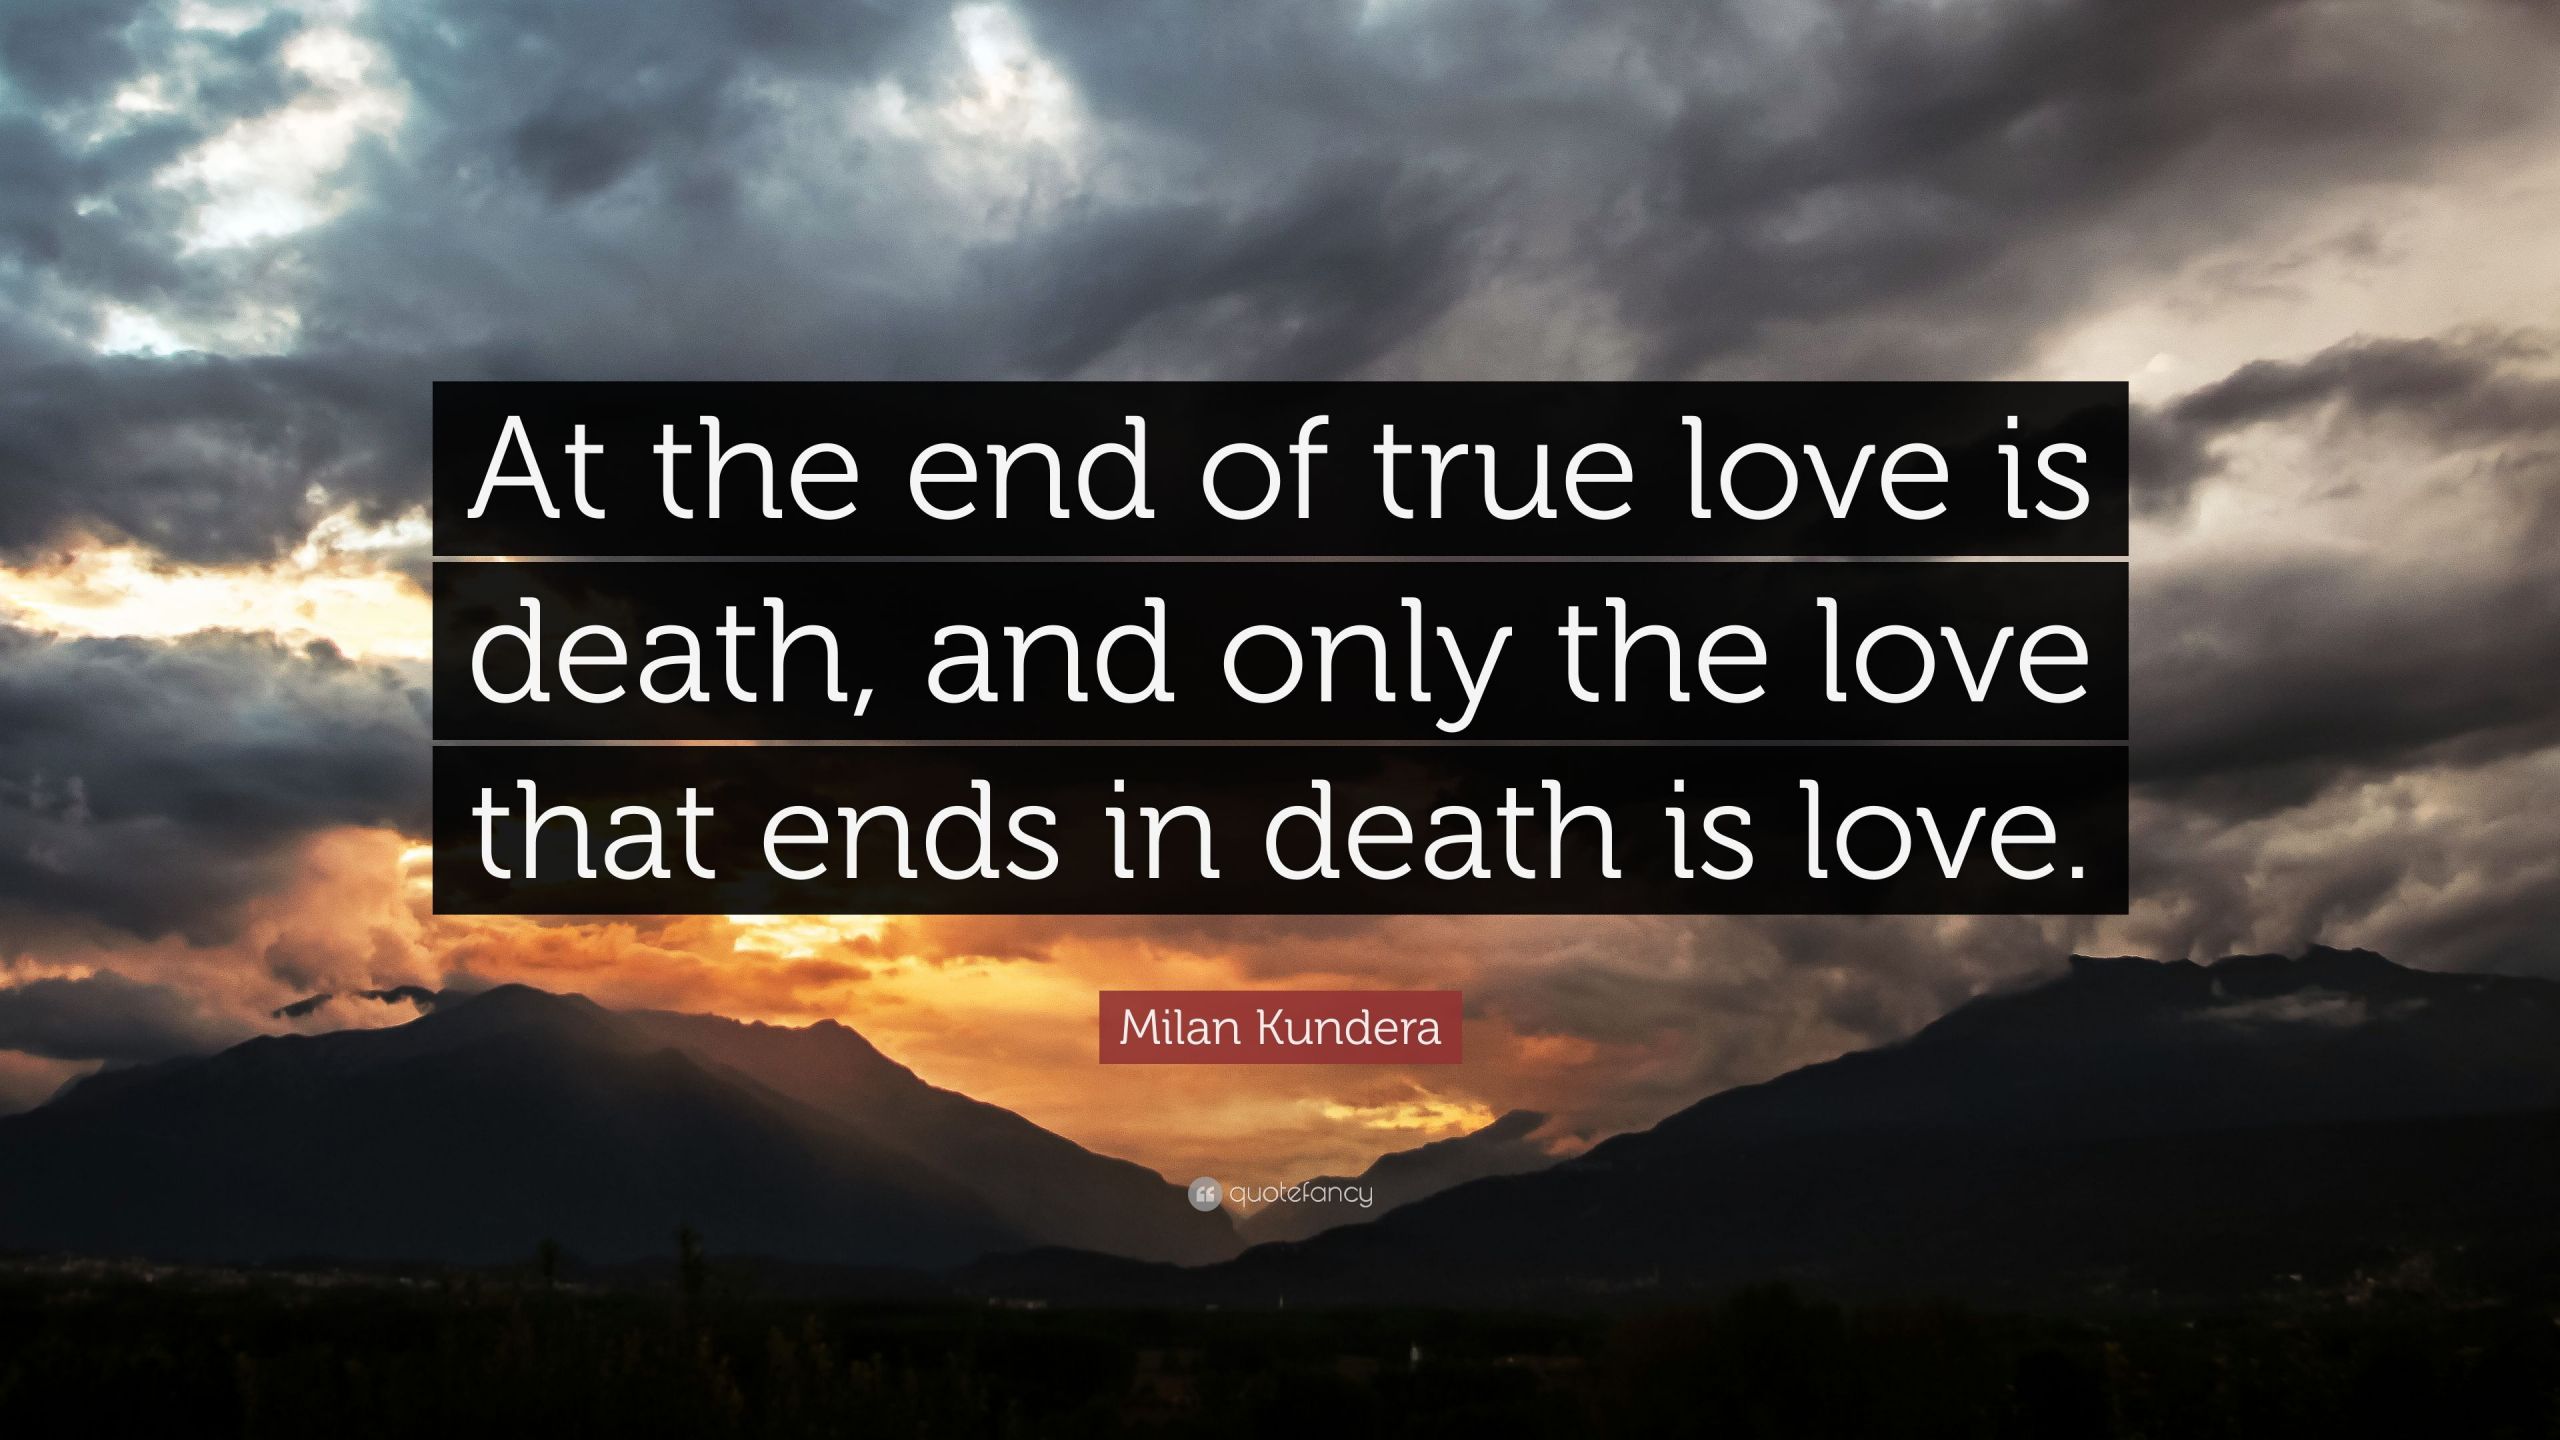 Quotes About Love And Death
 Milan Kundera Quote “At the end of true love is